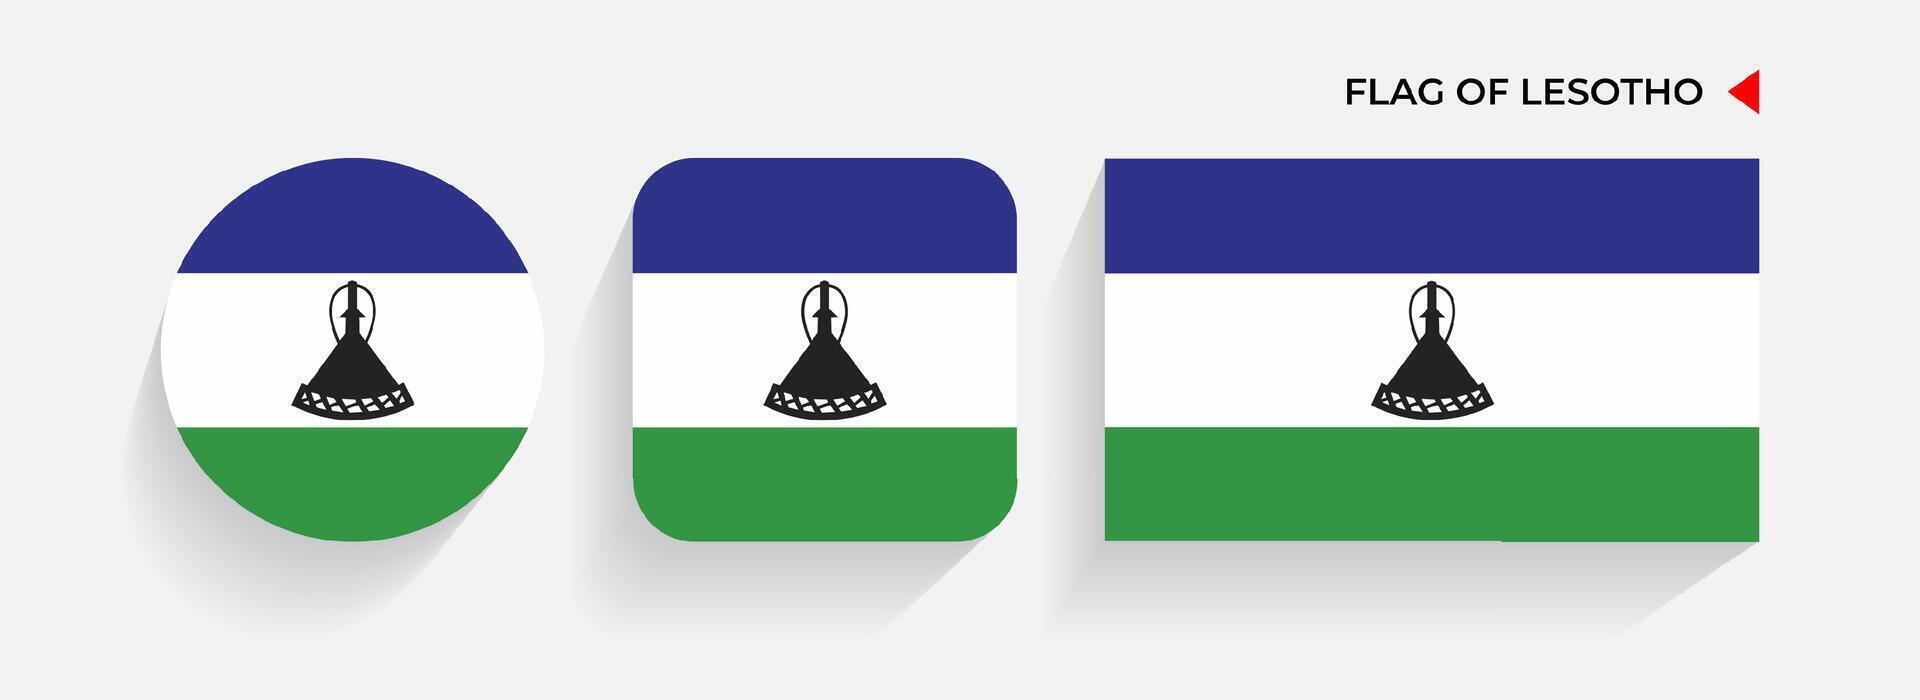 Lesotho Flags arranged in round, square and rectangular shapes vector